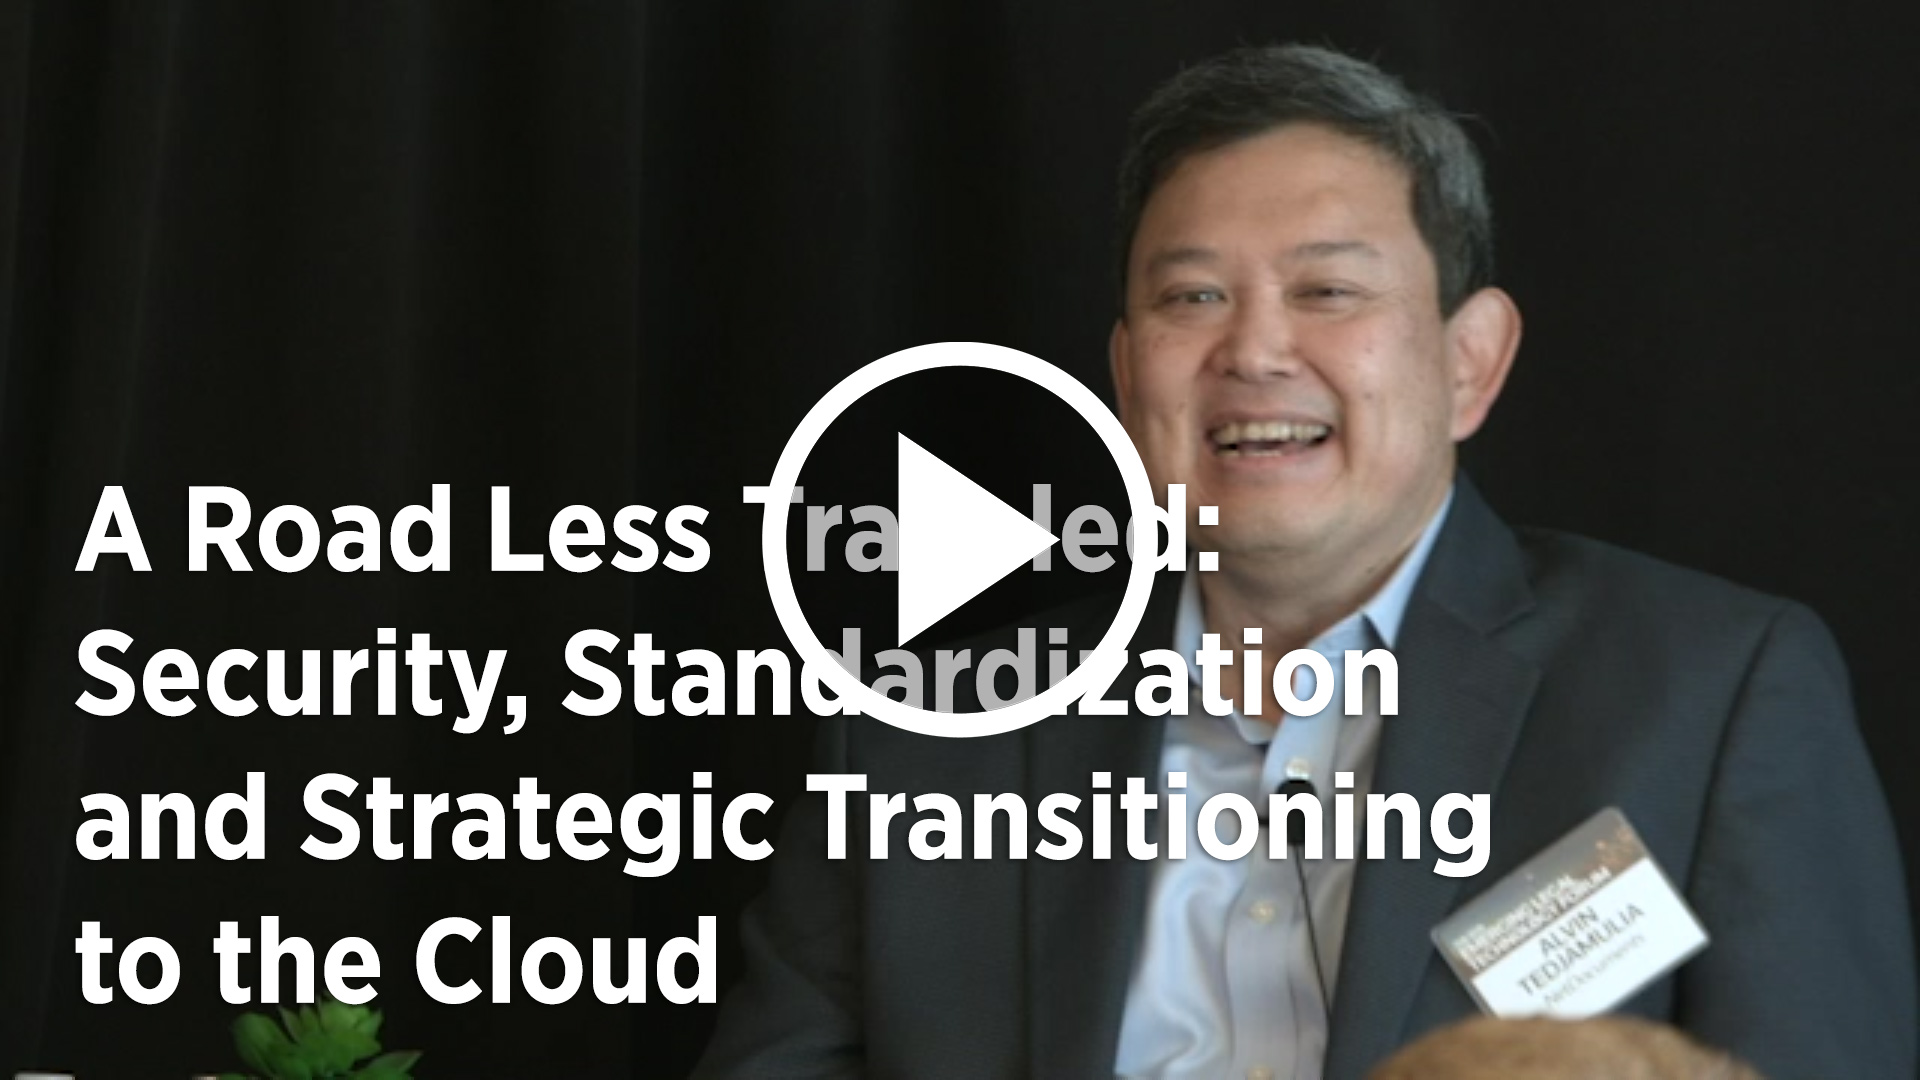 A Road Less Traveled: Security, Standardization and Strategic Transitioning to the Cloud